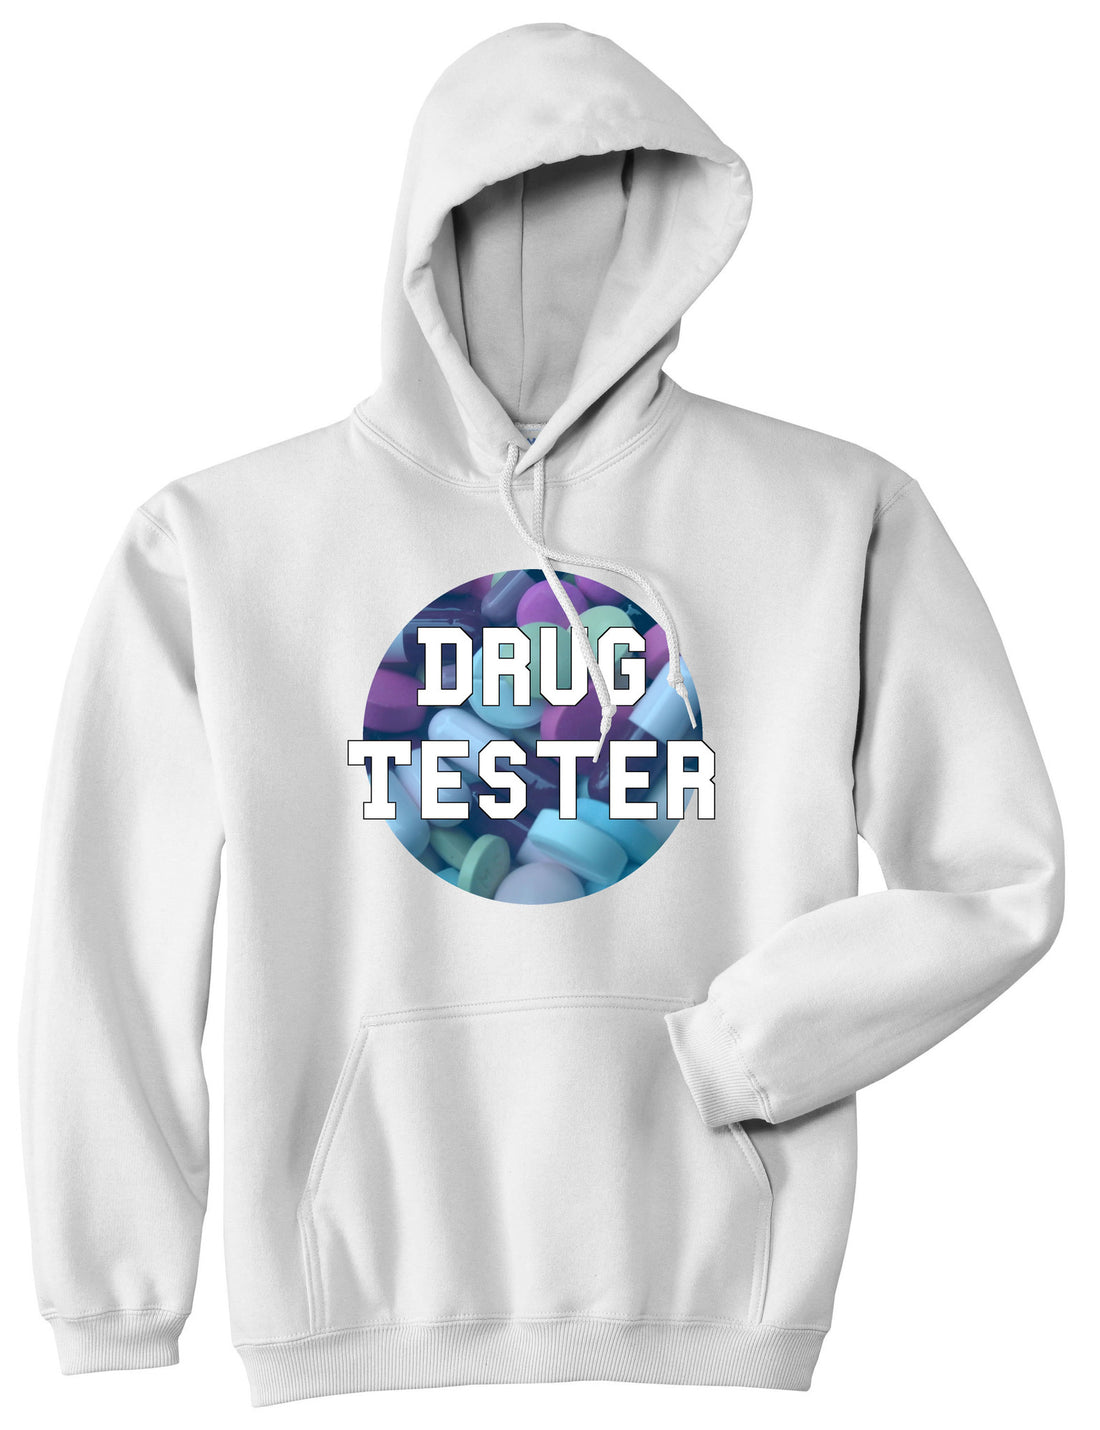 Drug tester weed smoking funny college Pullover Hoodie Hoody in White by Kings Of NY